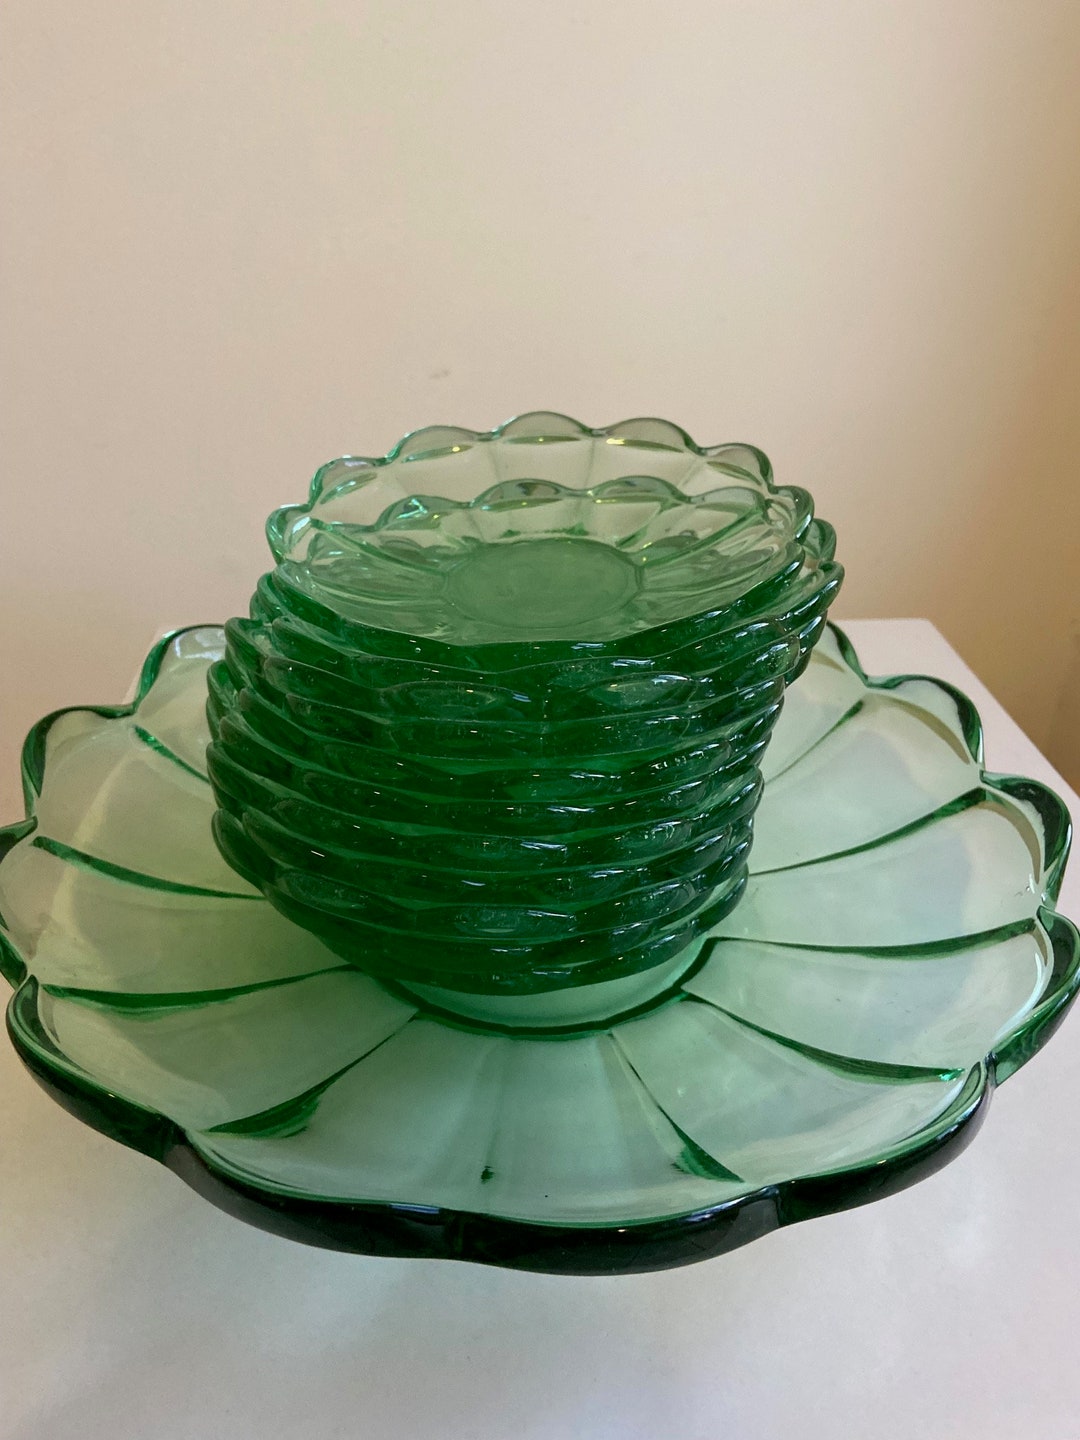 Jufhamvintage Vintage Green Glass Dish and Saucers 50s Pressed Glass ...